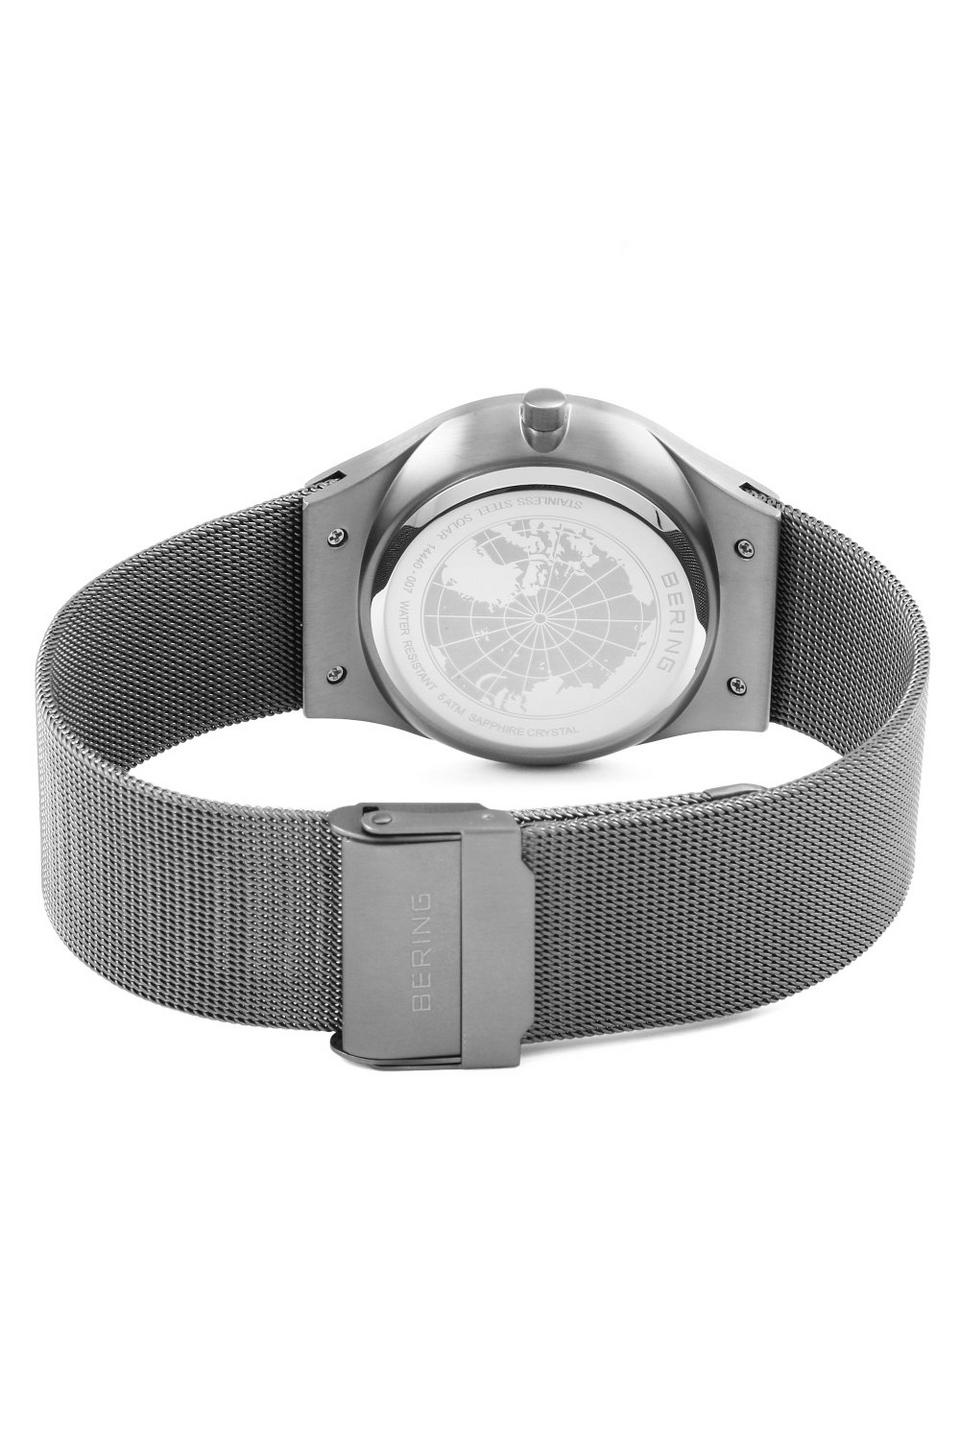 Watches | Slim Solar Stainless Steel Classic Analogue Solar Watch ...